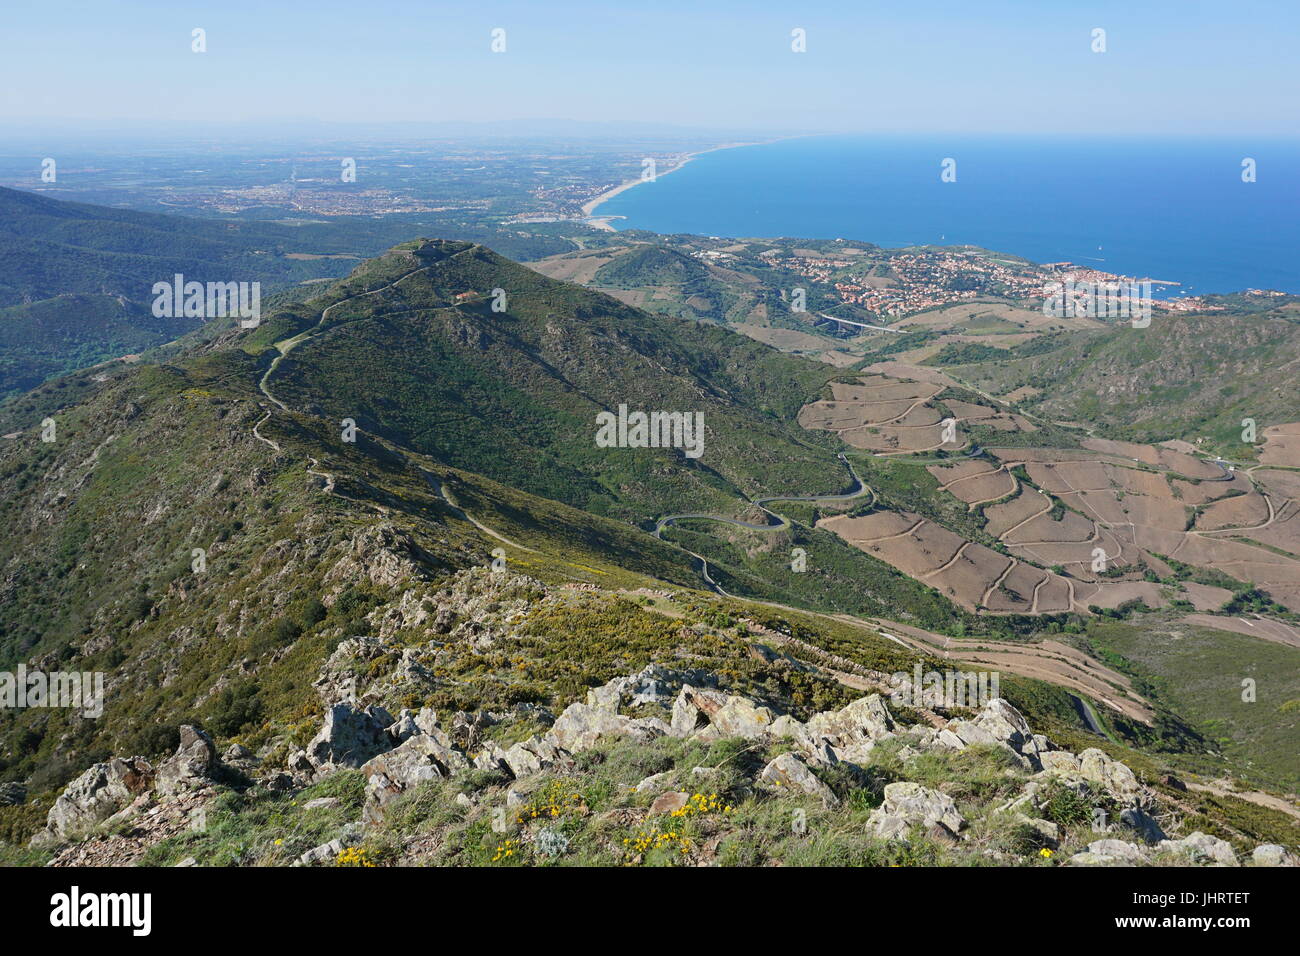 Landscape from the mountains of the massif des Alberes overlooking the Vermilion coast, Mediterranean sea, Pyrenees Orientales, south of France Stock Photo